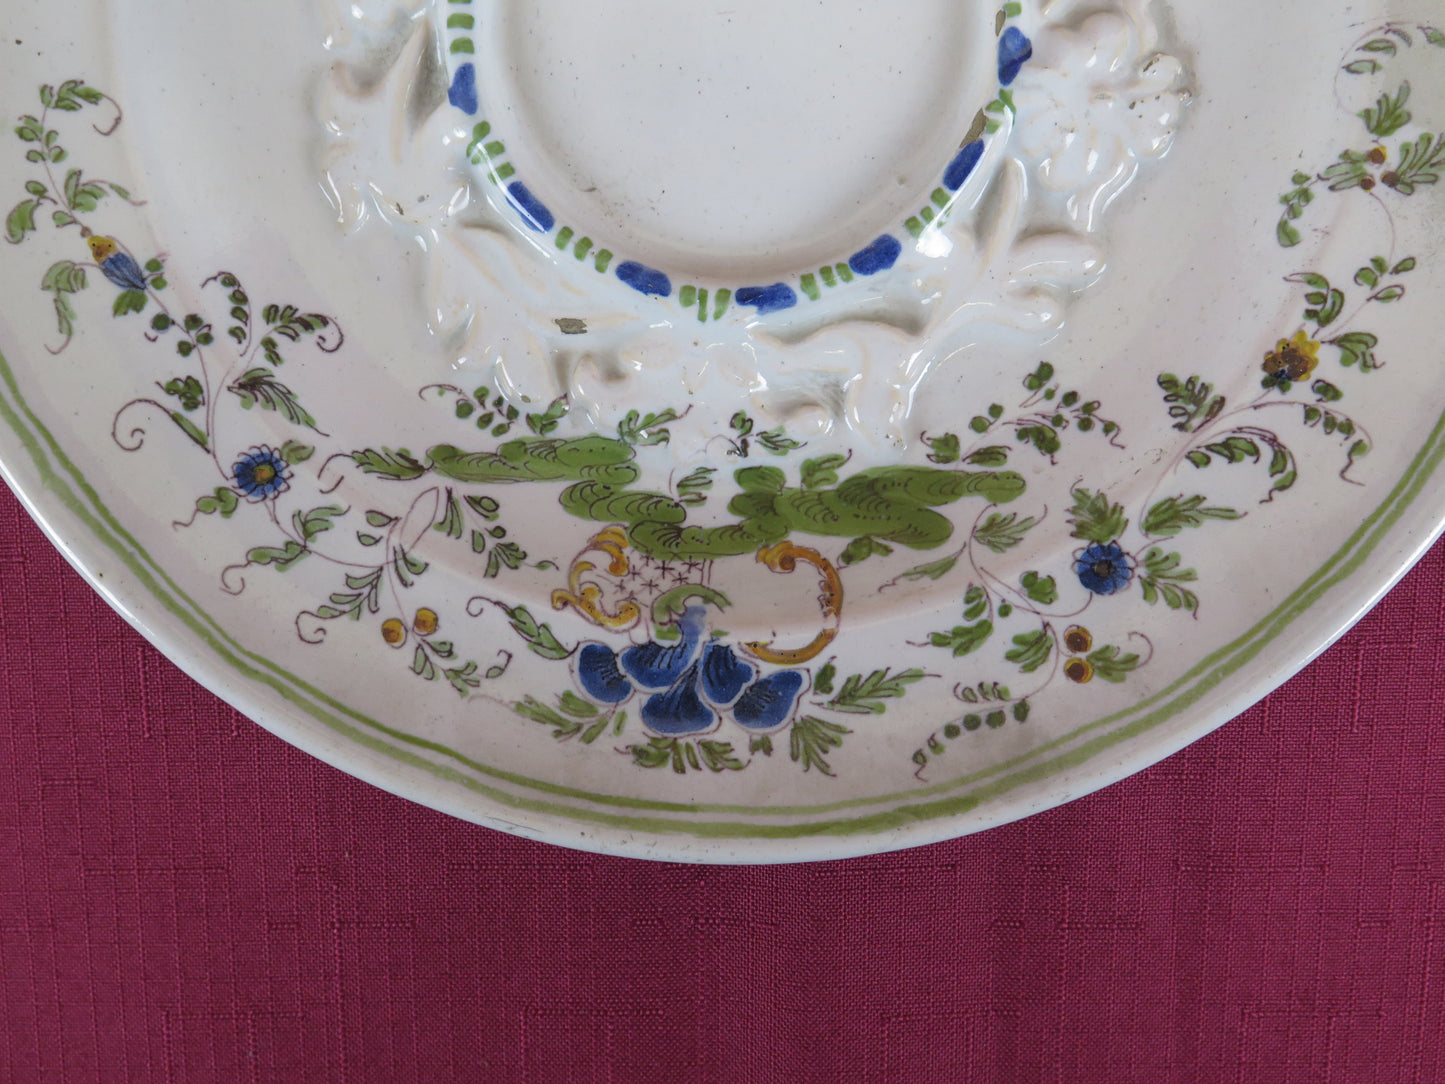 ANTIQUE HAND PAINTED MAILIC PLATE FAIENCE CERAMIC VS16